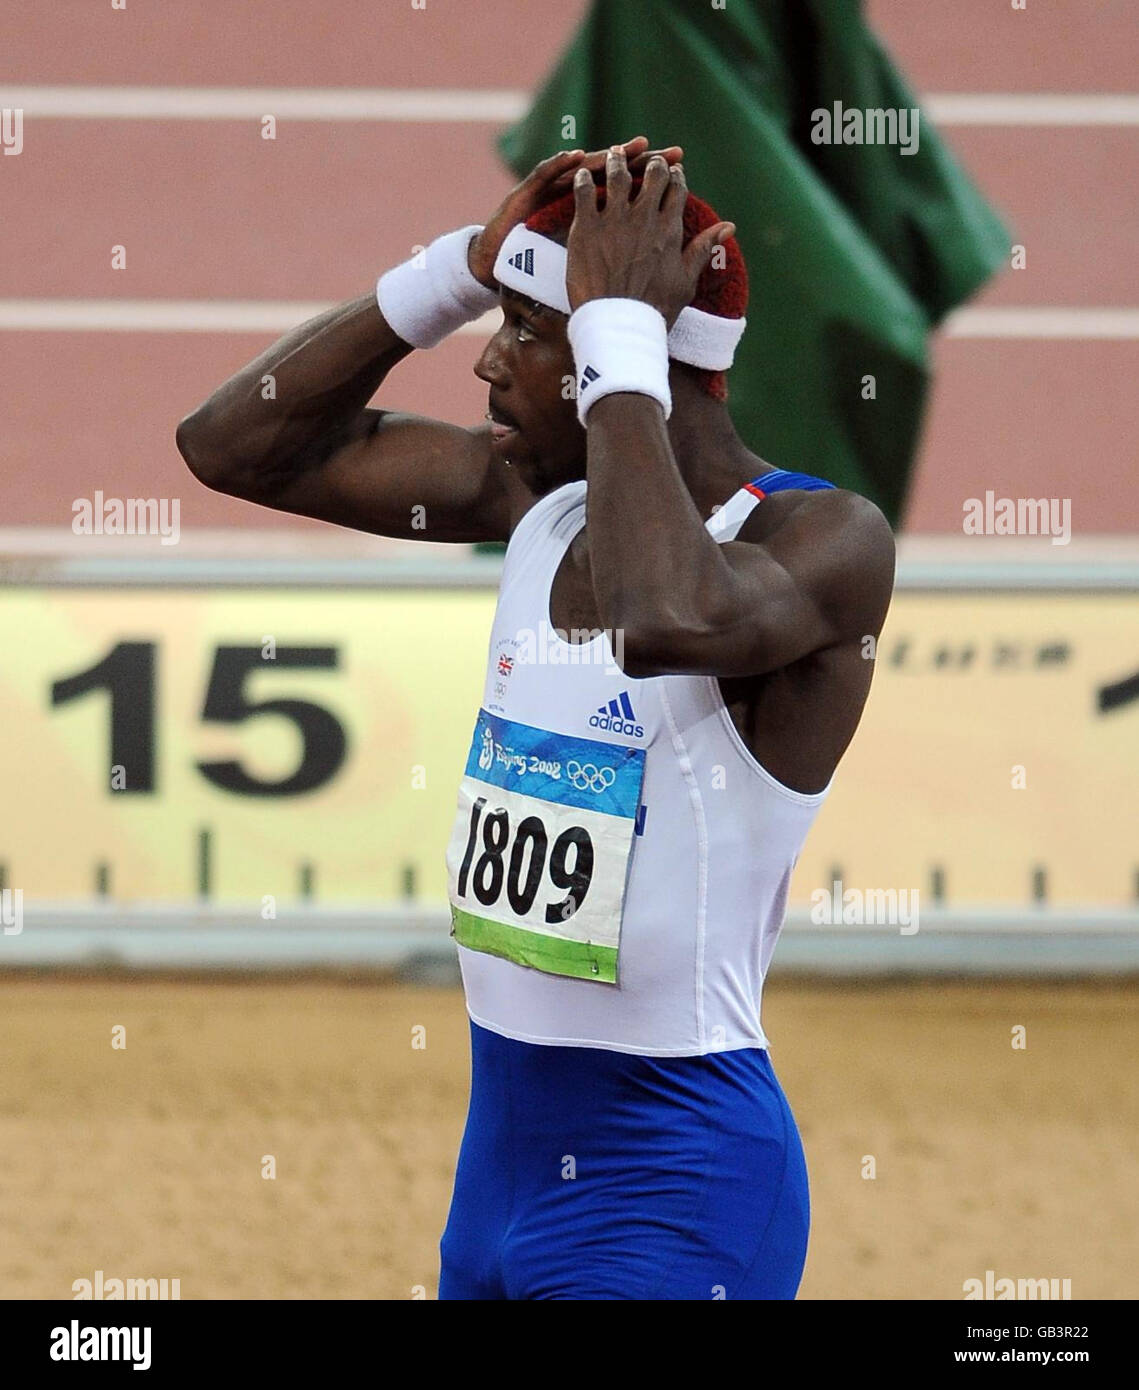 Great Britain's Phillips Idowu during the Men's Triple Jump Final at the National Stadium in Beijing during the 2008 Beijing Olympic Games in China. Stock Photo